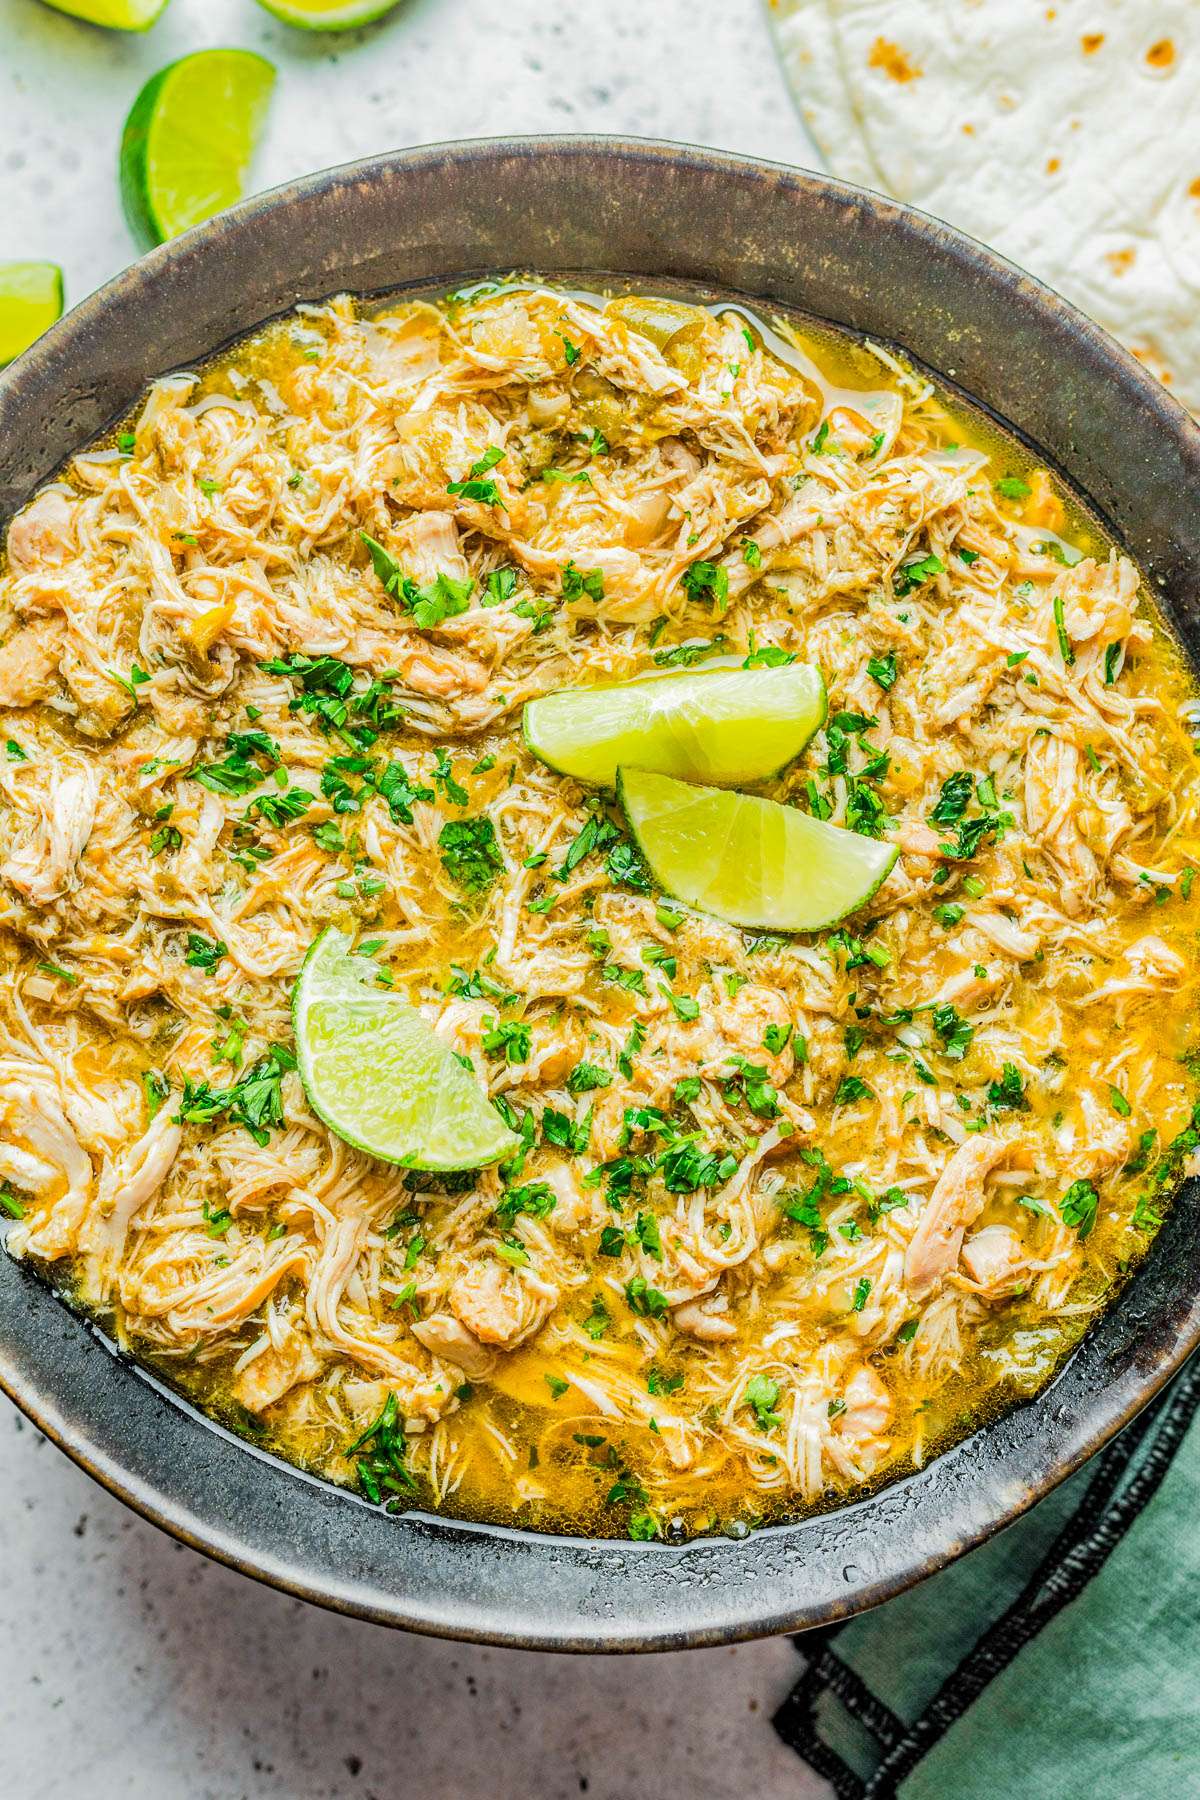 GREEN CHILI SLOW COOKER CHICKEN